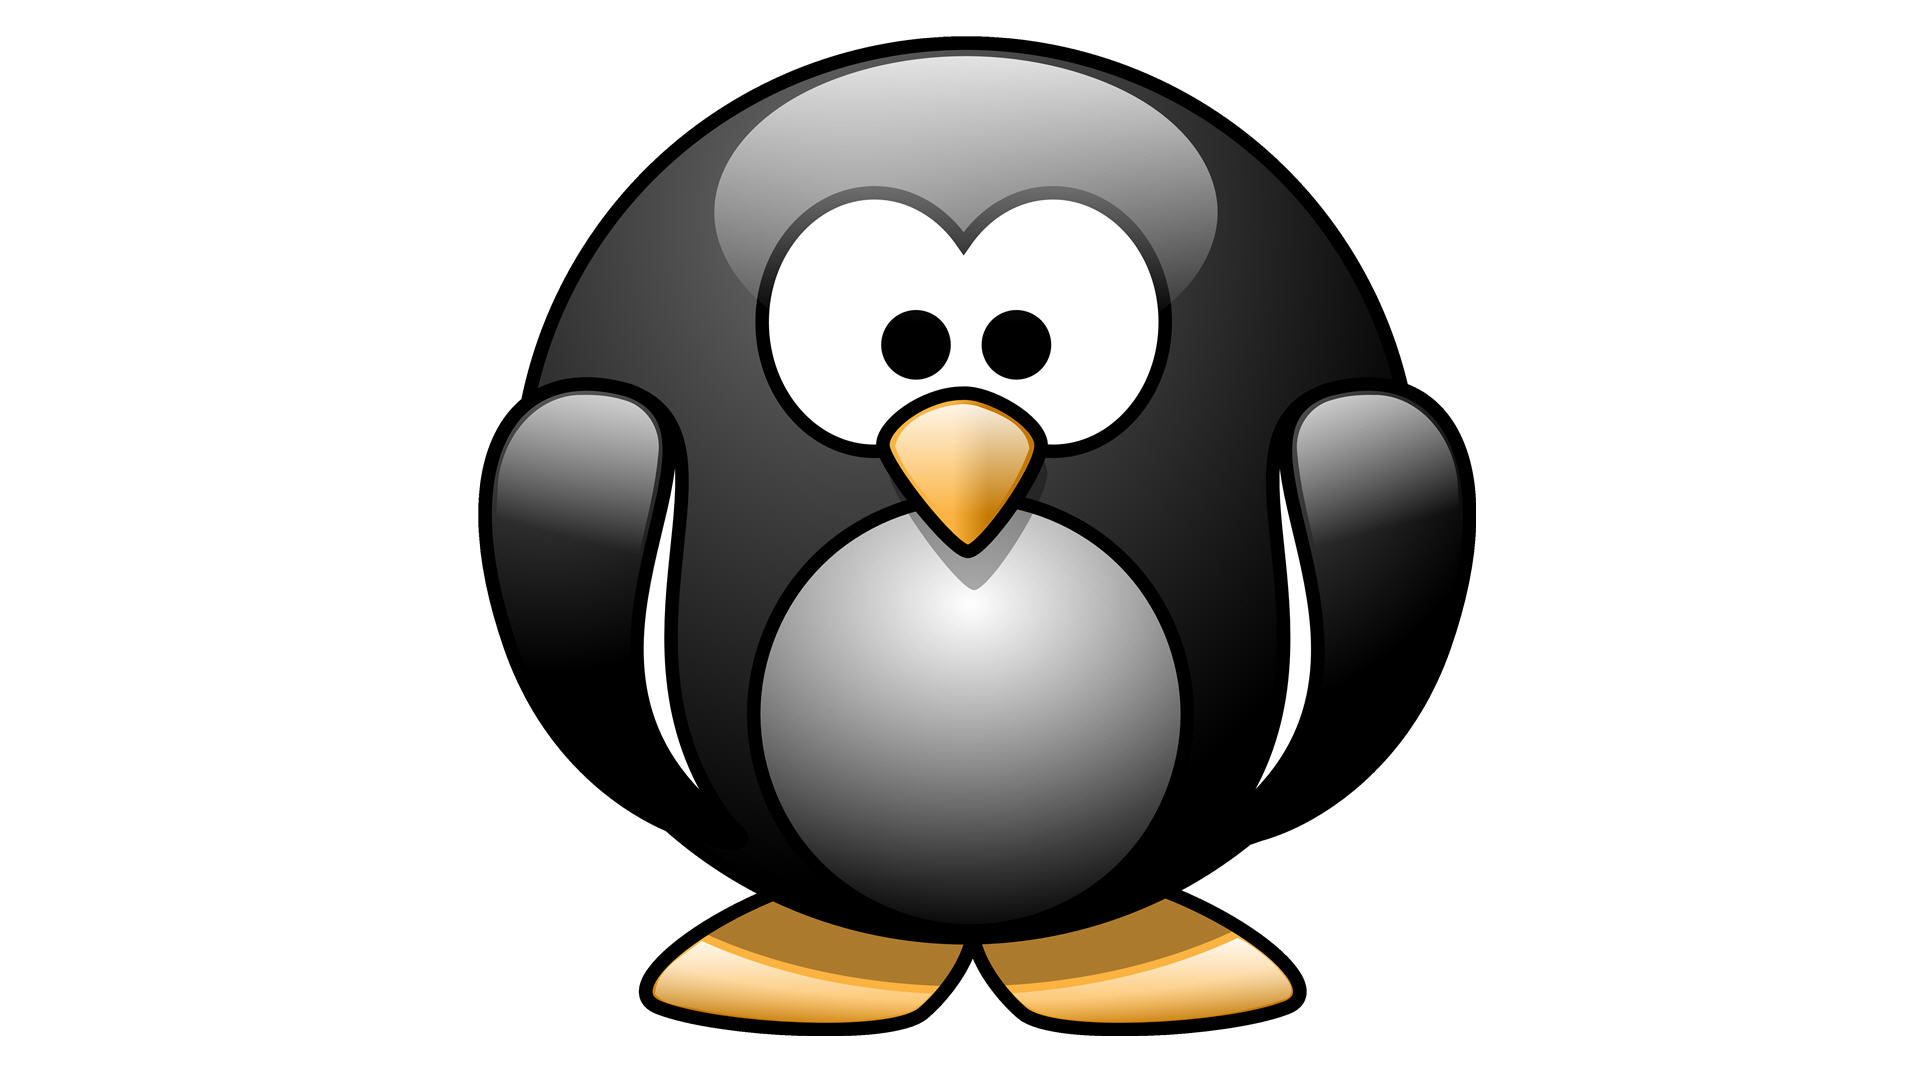 Cute Animated Penguins Wallpaper - ClipArt Best